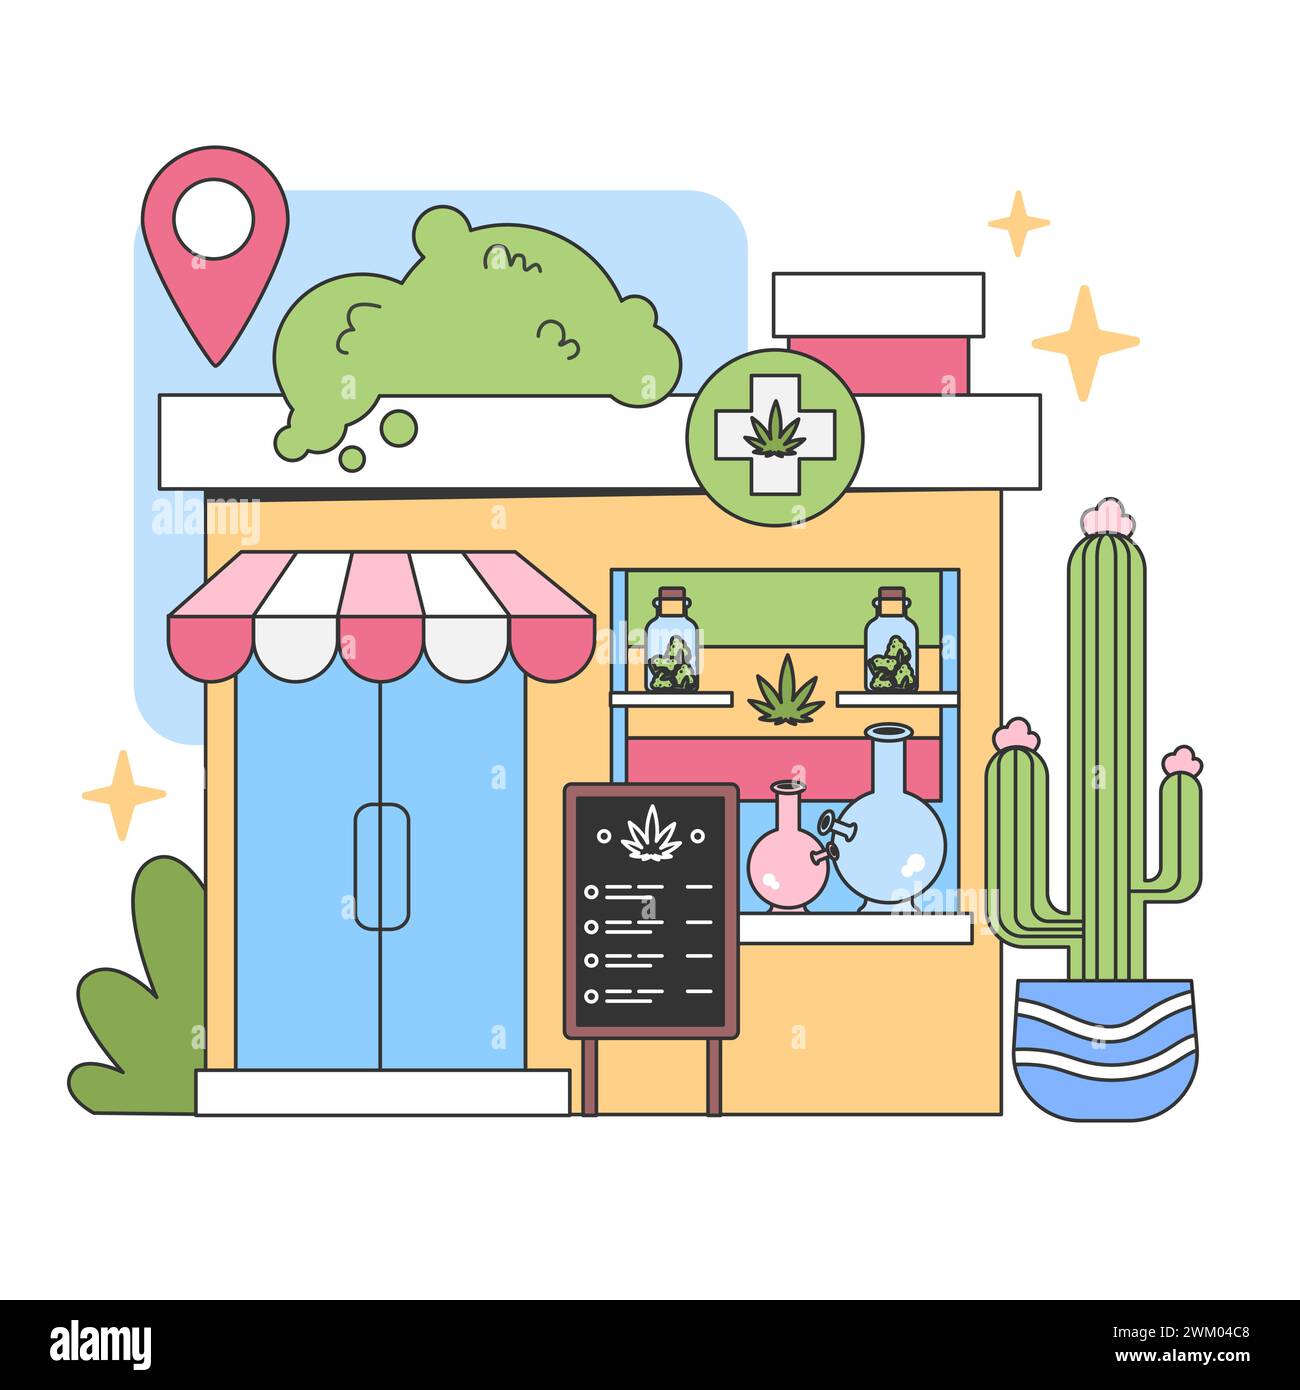 Cannabis storefront scene. Store exterior with product display, menu board, and cactus. Legal marijuana sales concept. Flat vector illustration Stock Vector